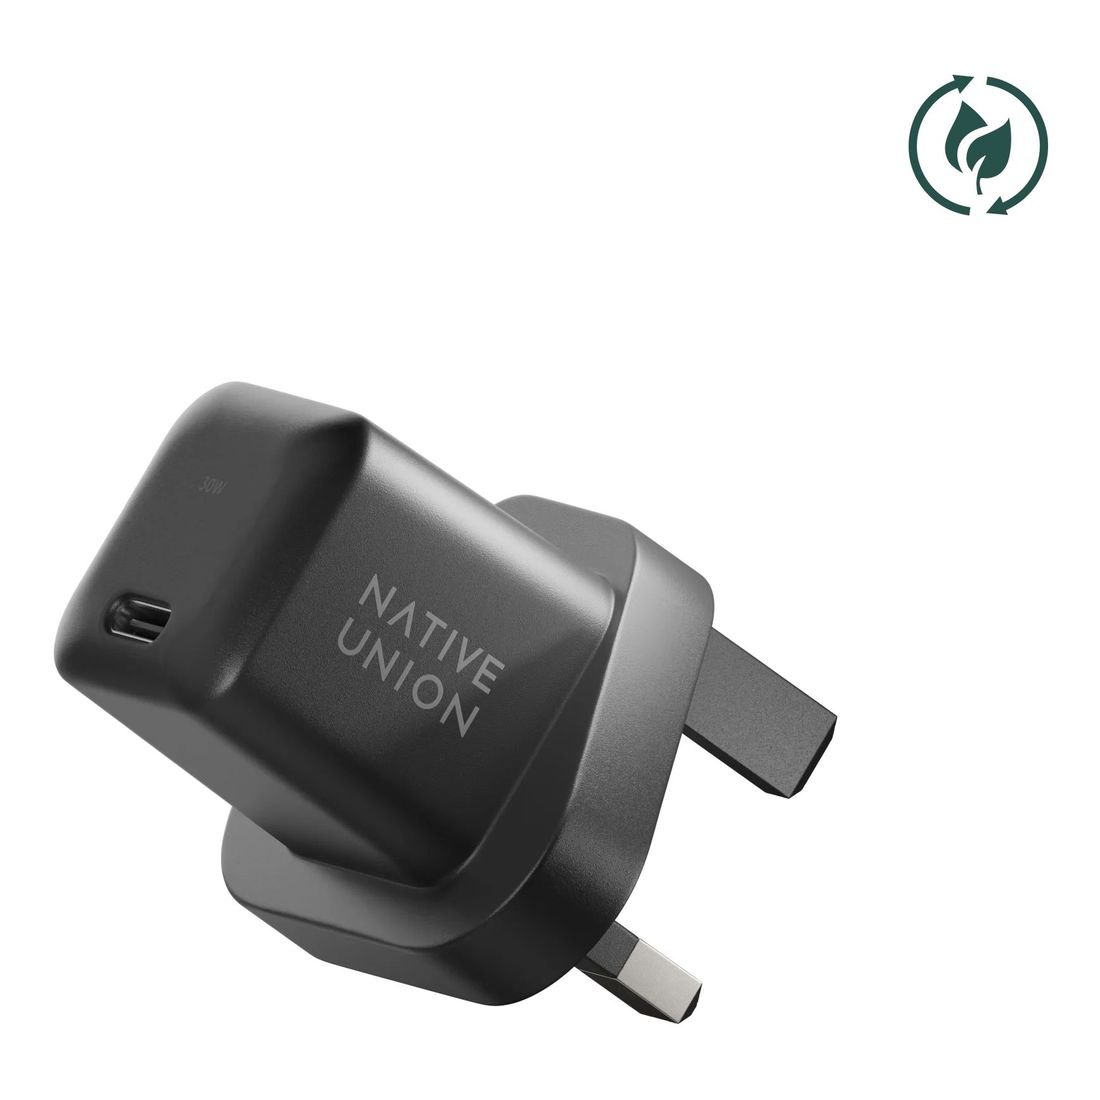 Native Union Fast Gan Charger PD 30W USB-C Port Wall Charger - Black (UK)